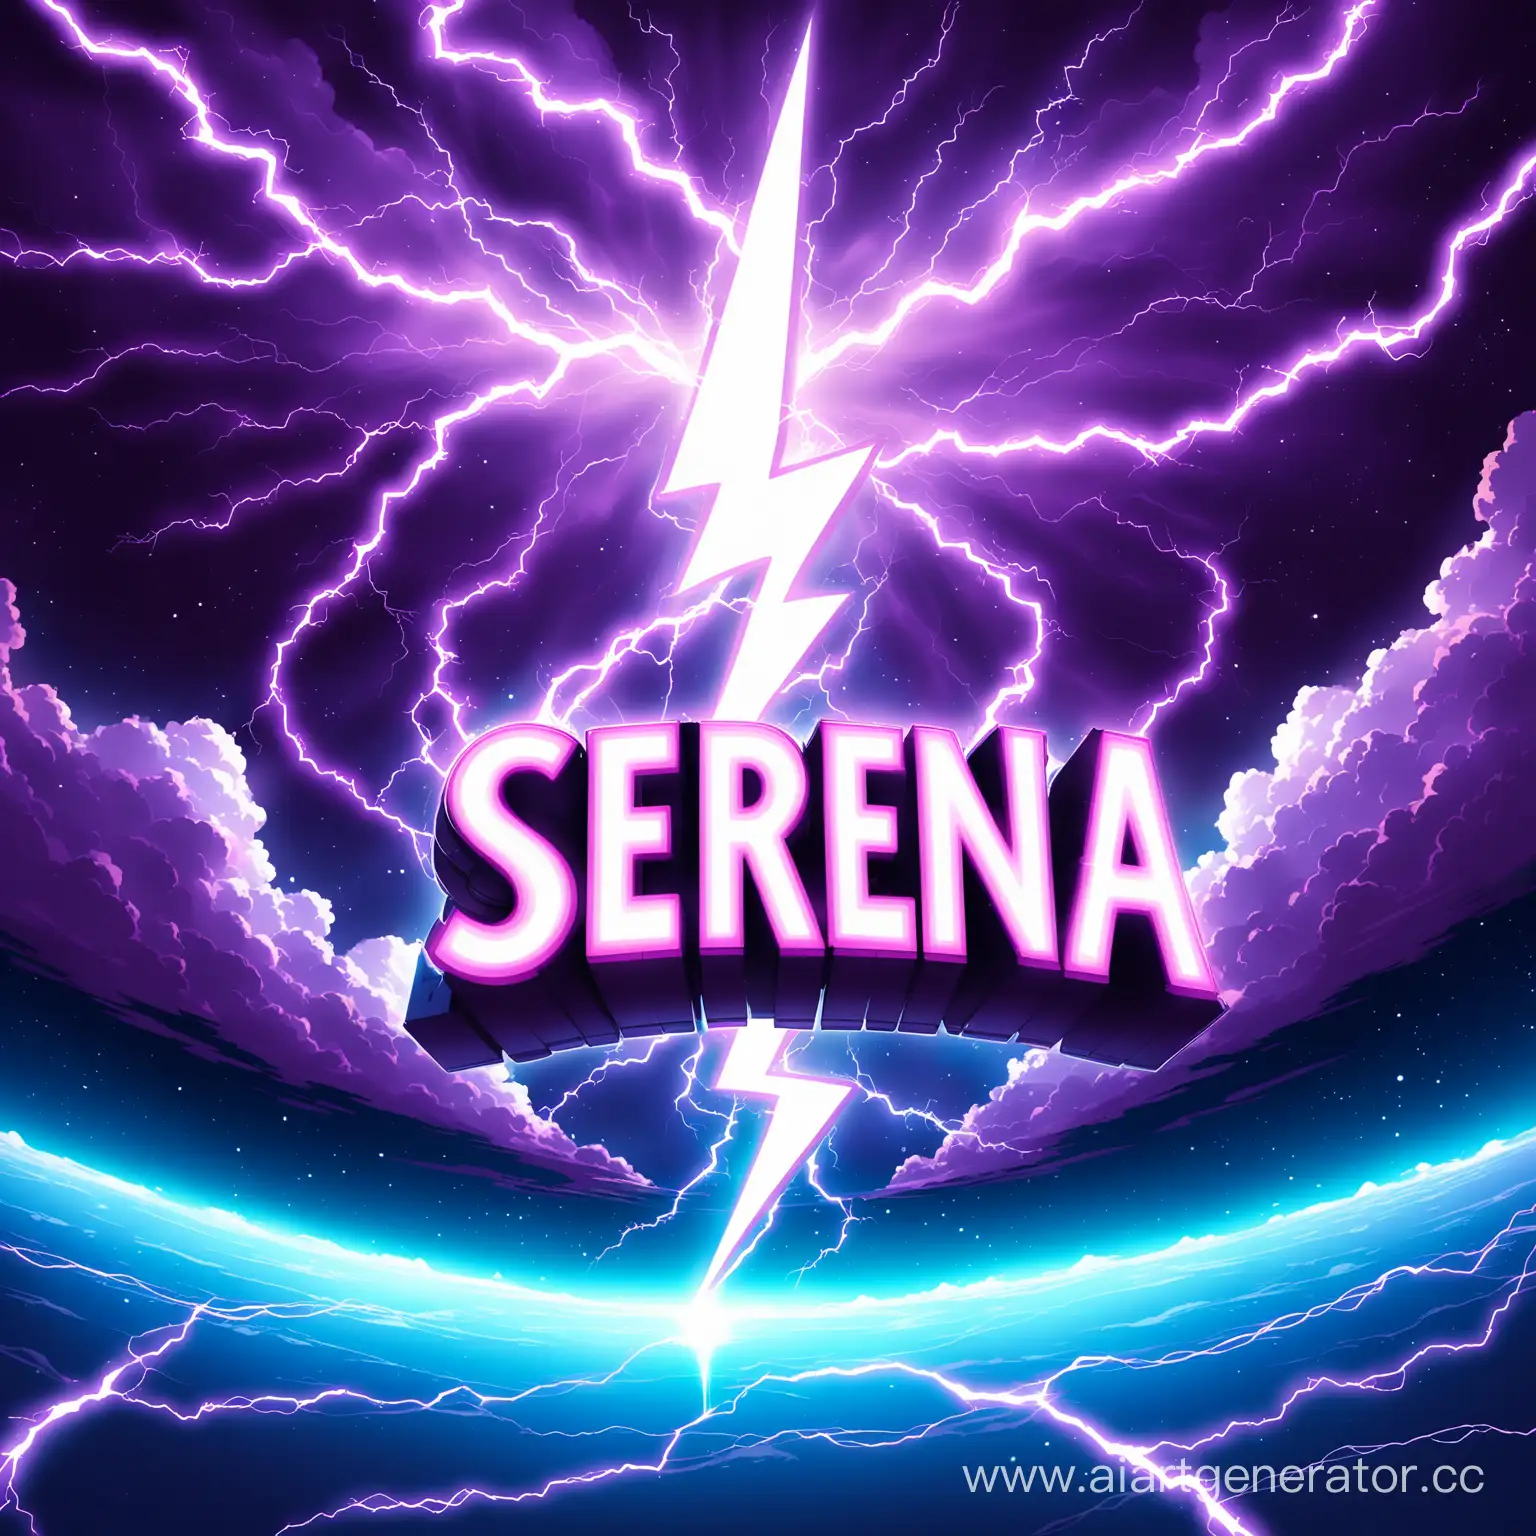 Futuristic-Travelers-with-Serena-and-EPower-Stash-amid-Lightning-Bolts